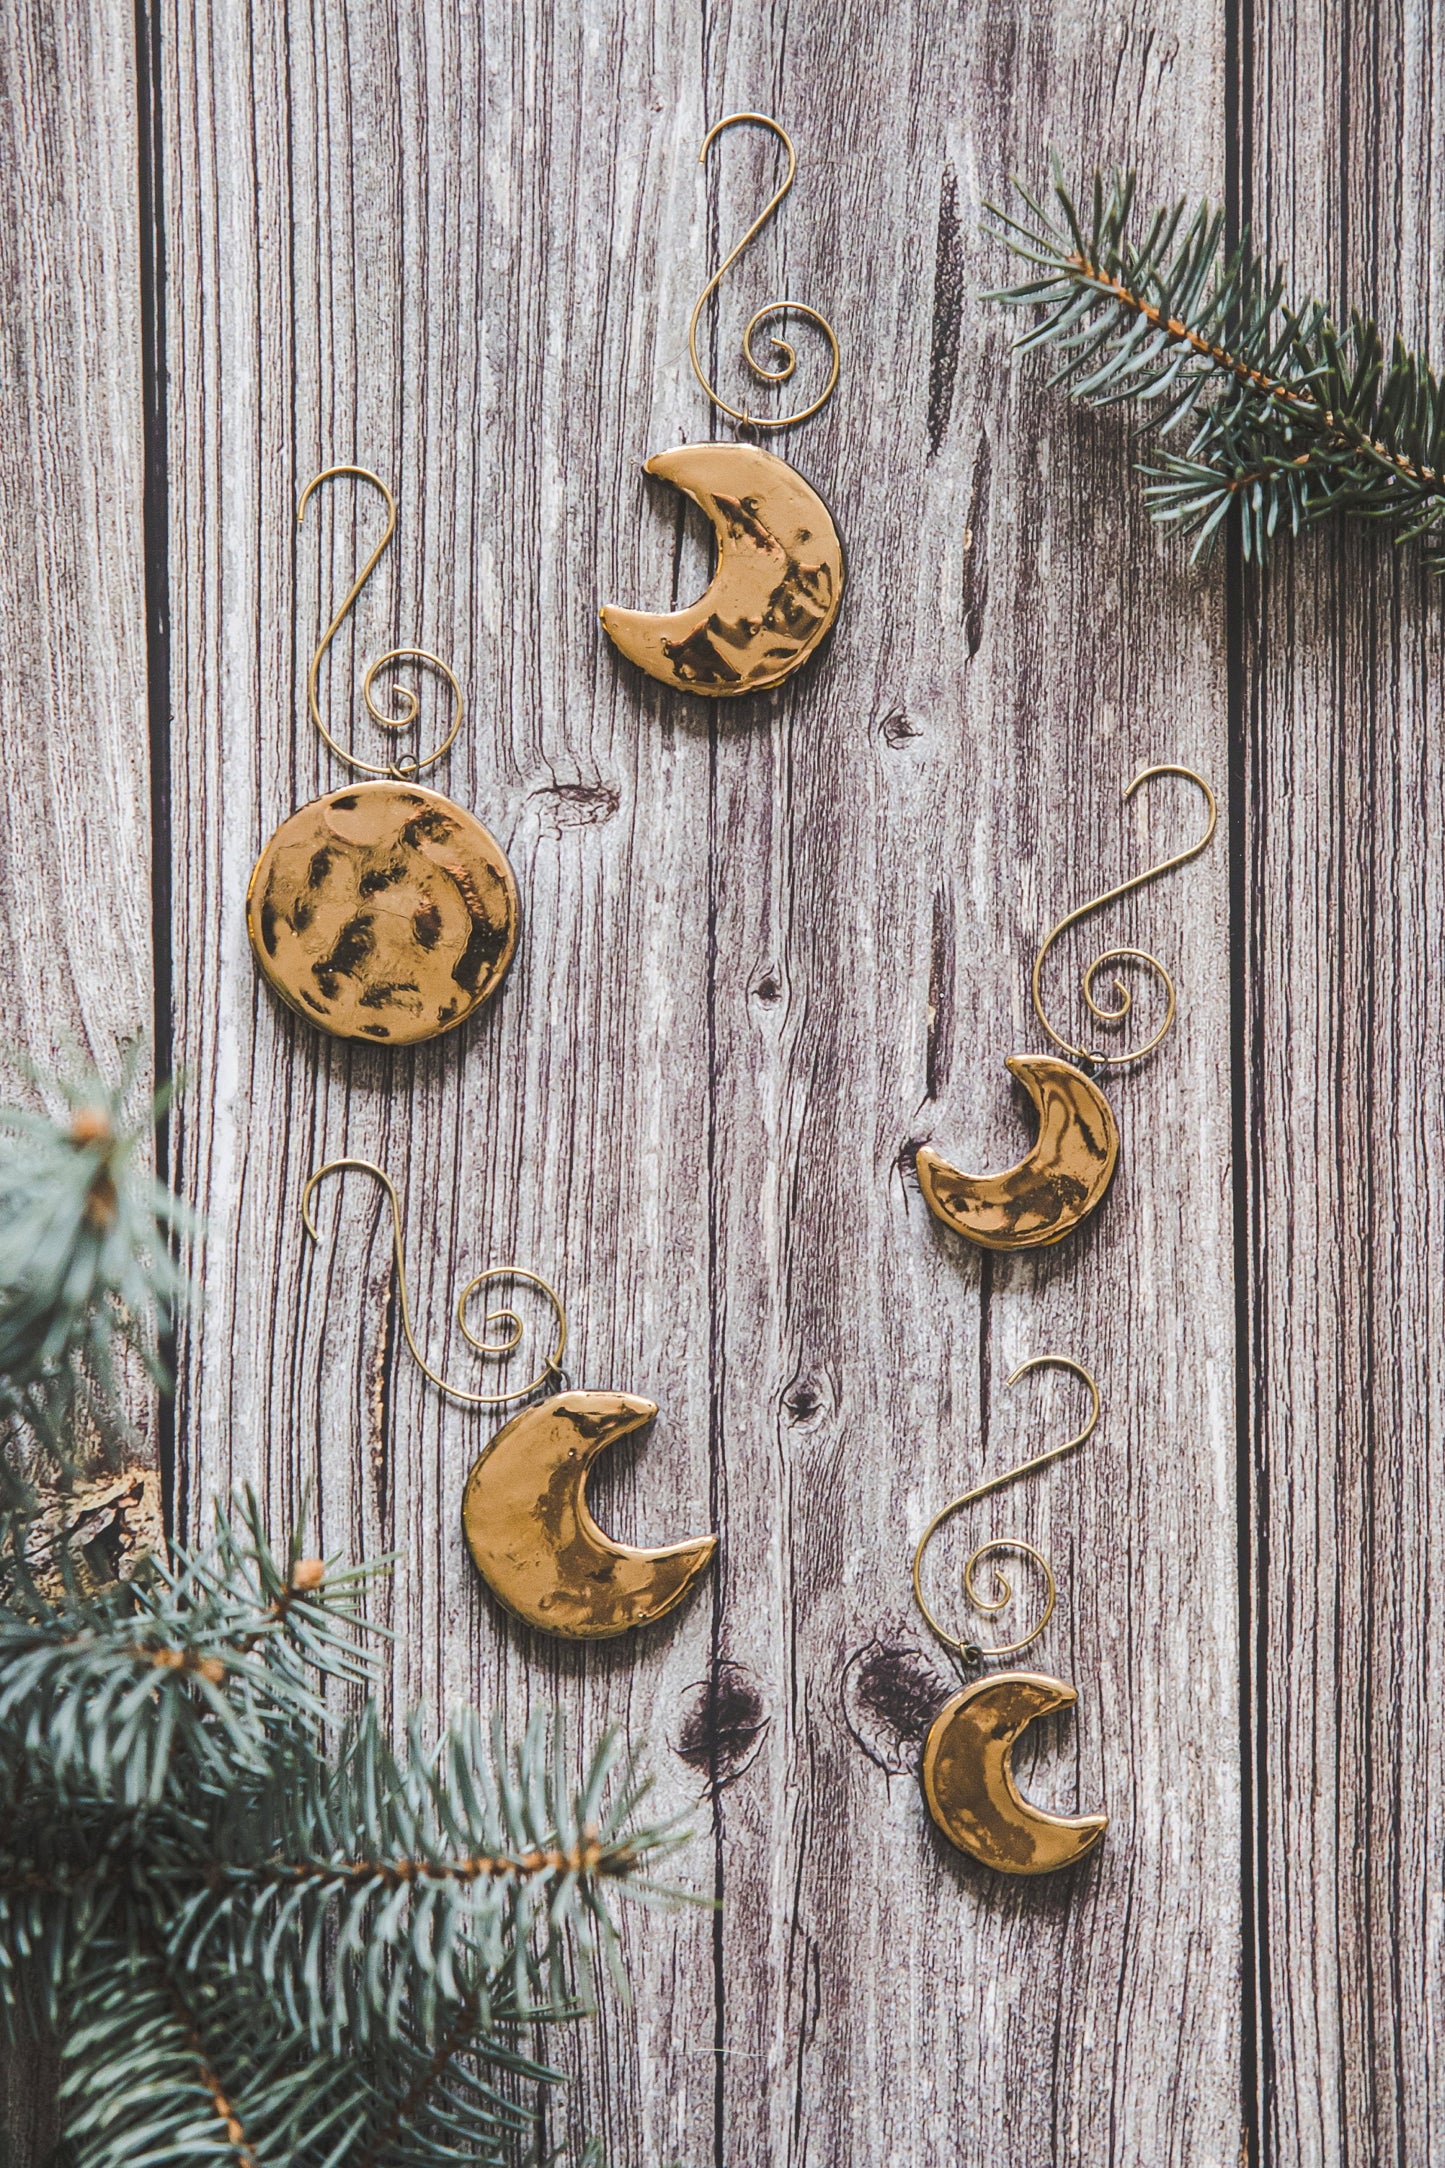 Gold plated ceramic moon phases Christmas ornament set of five - Full moon, young moon, old moon, Lunar Christmas decoration gift